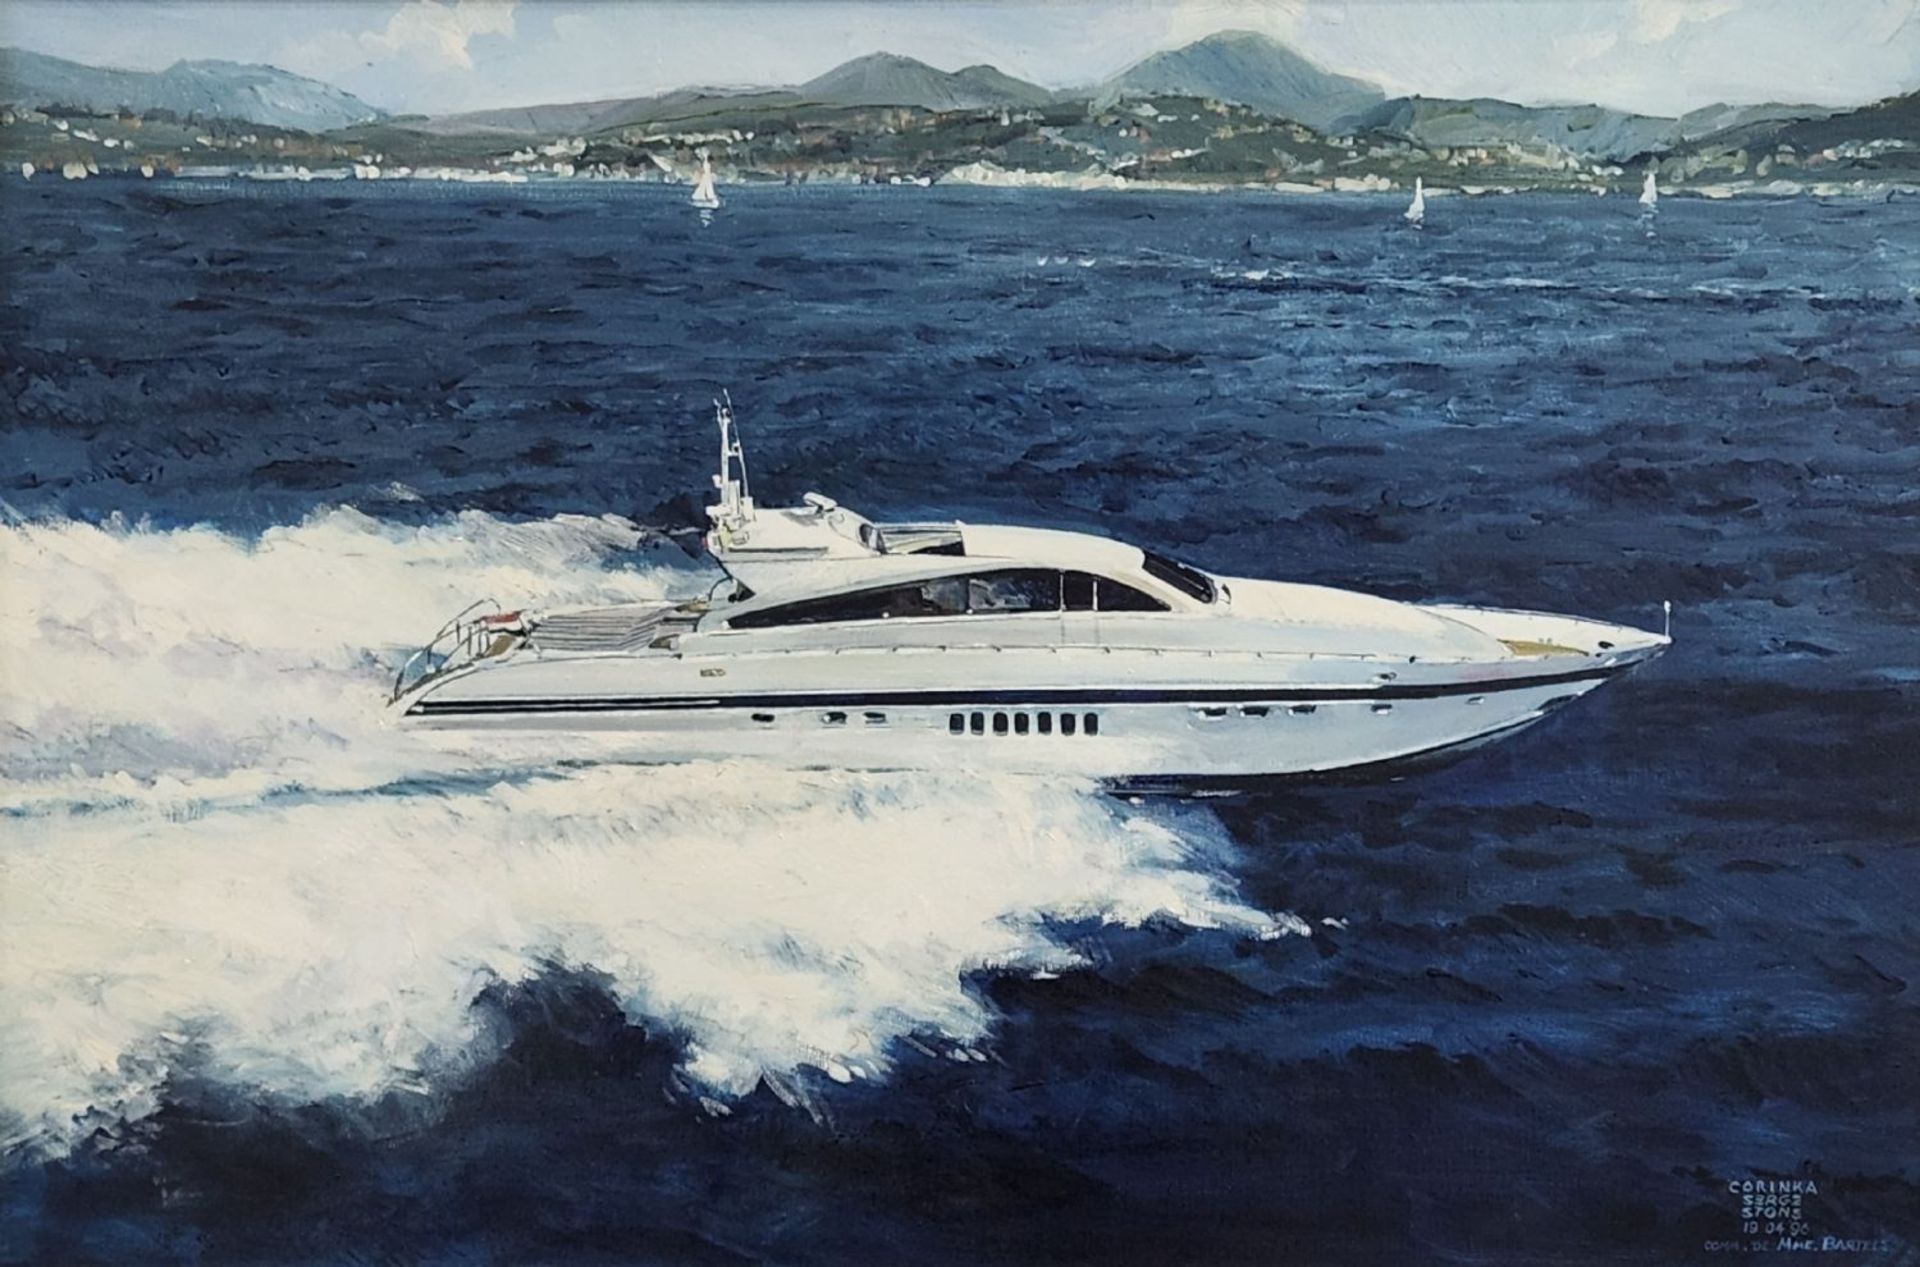 'Yacht' - painting, old painting, oil on canvas, signed 'Stone Serge' and dated: 1996. Dimensions: